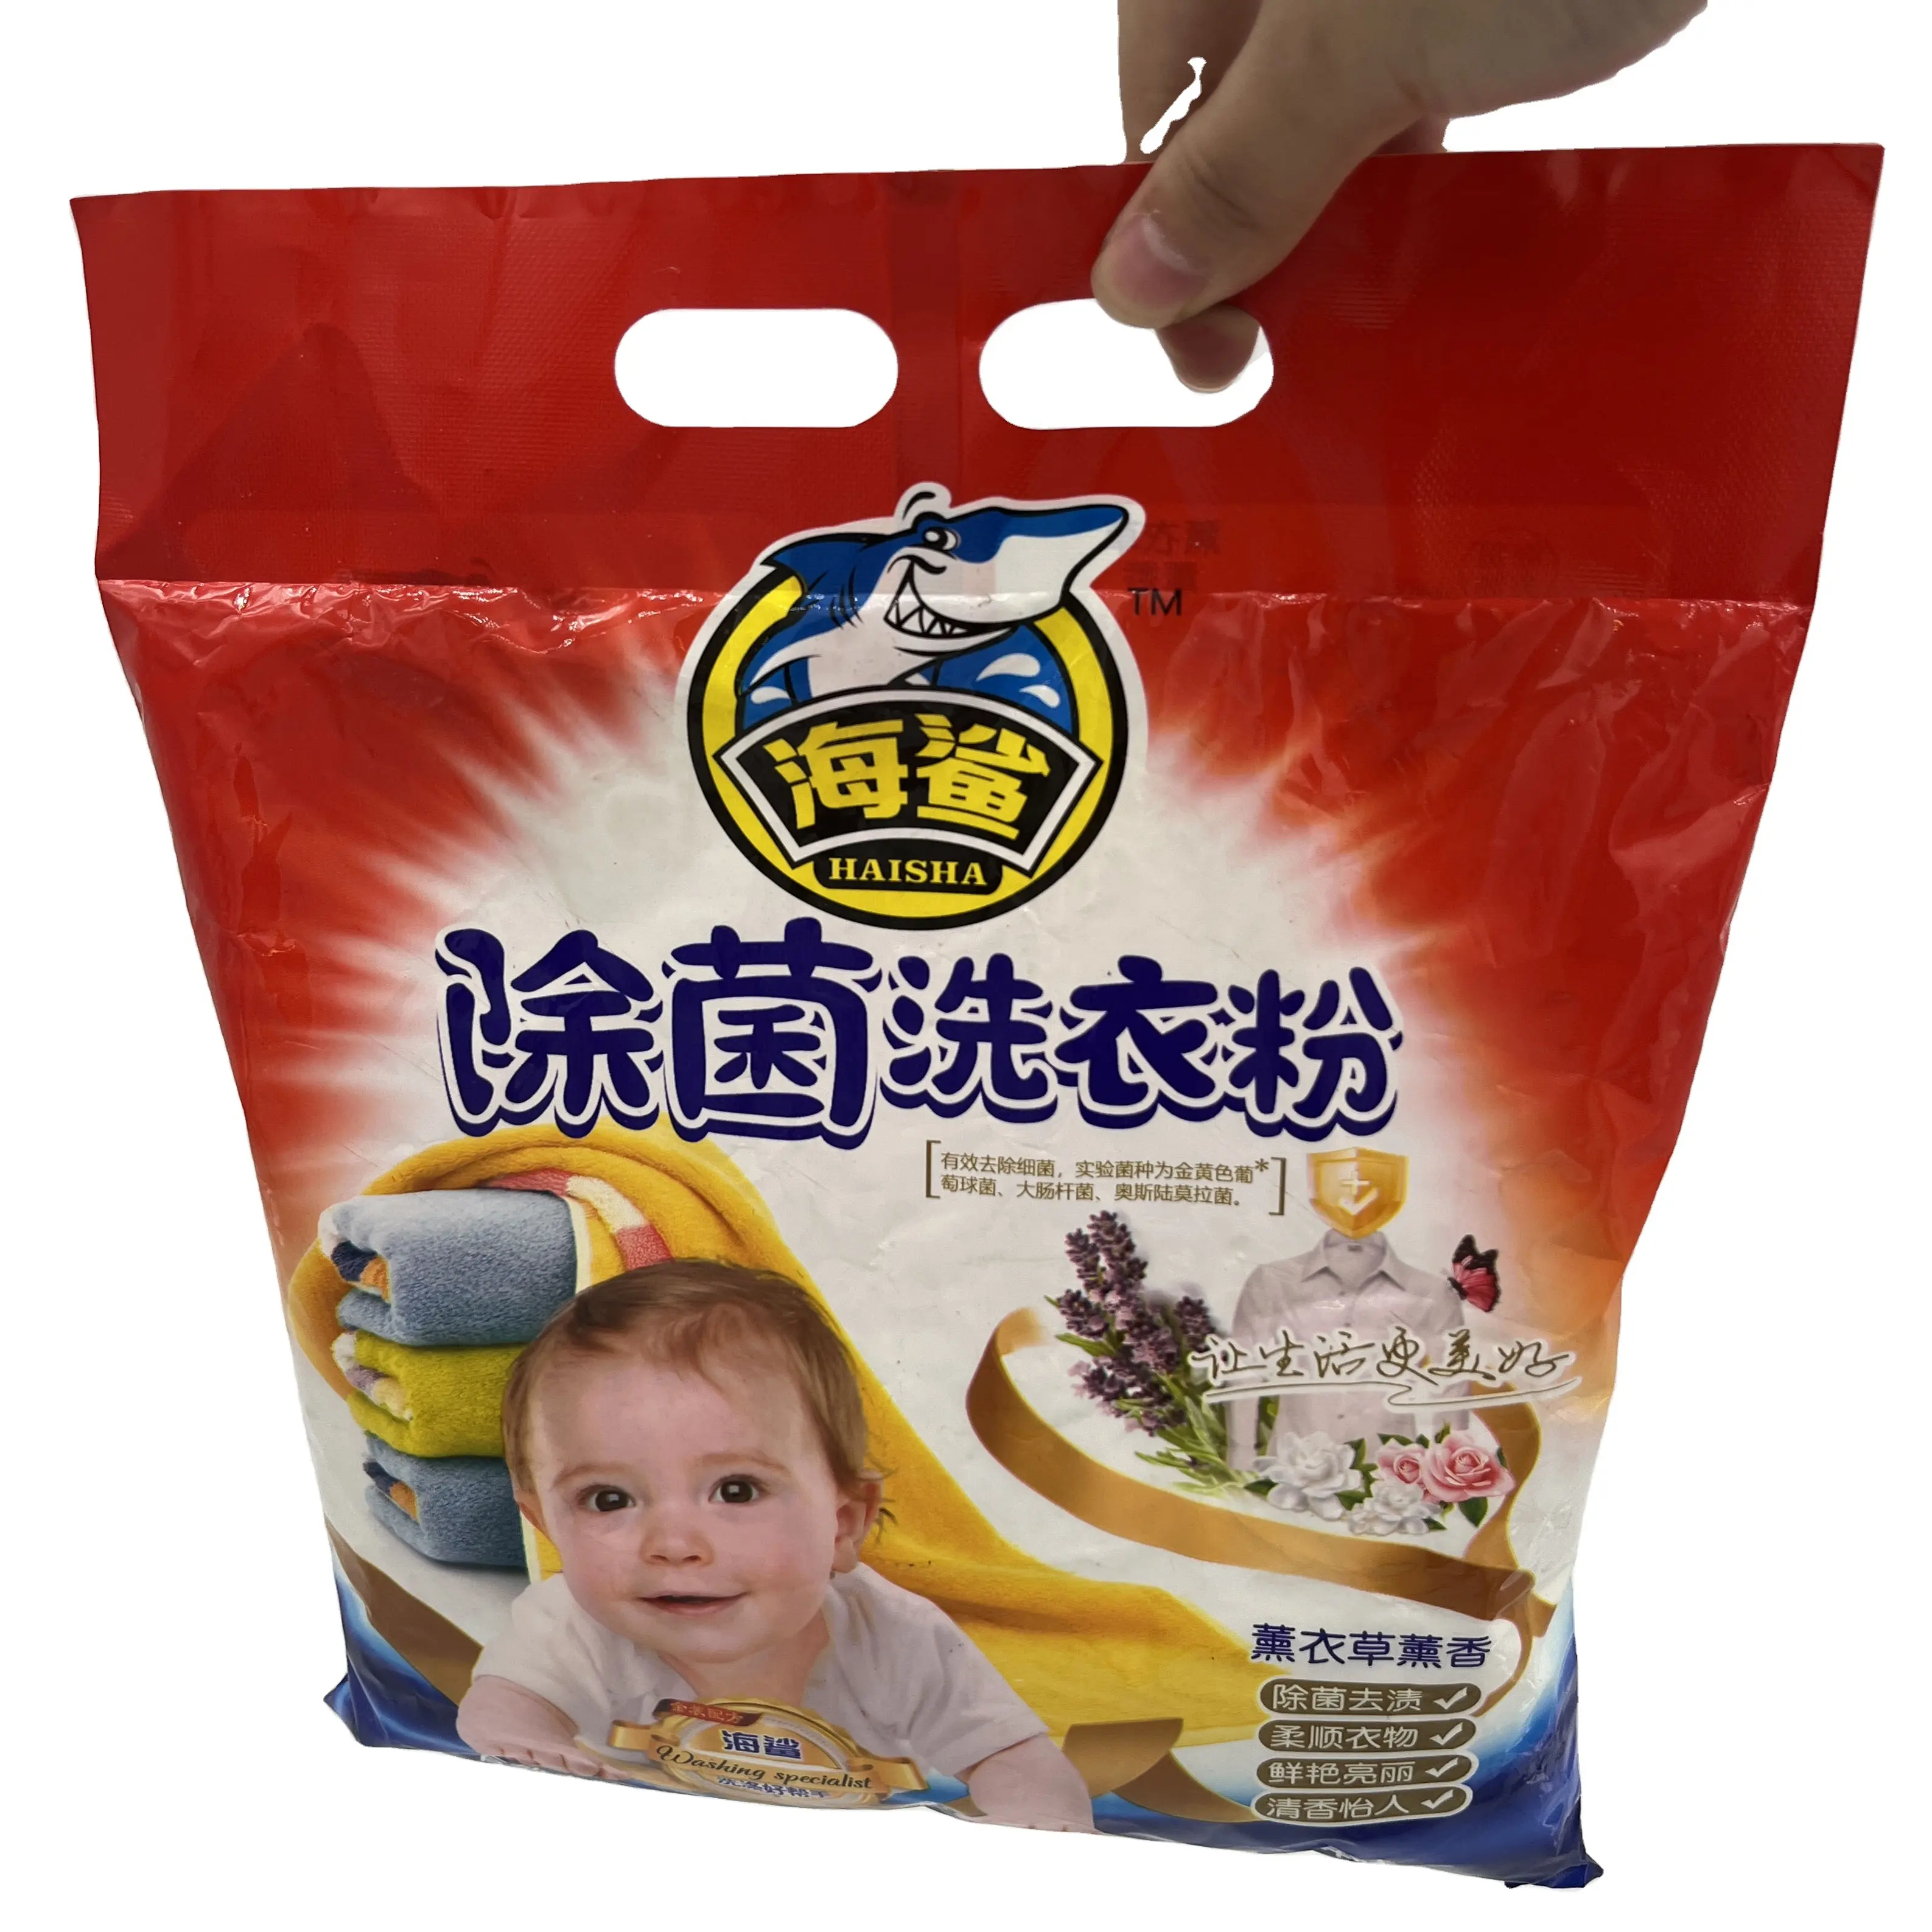 Hot Sale Private Label Baby Use Laundry Detergent Washing Powder 508g/20 bags